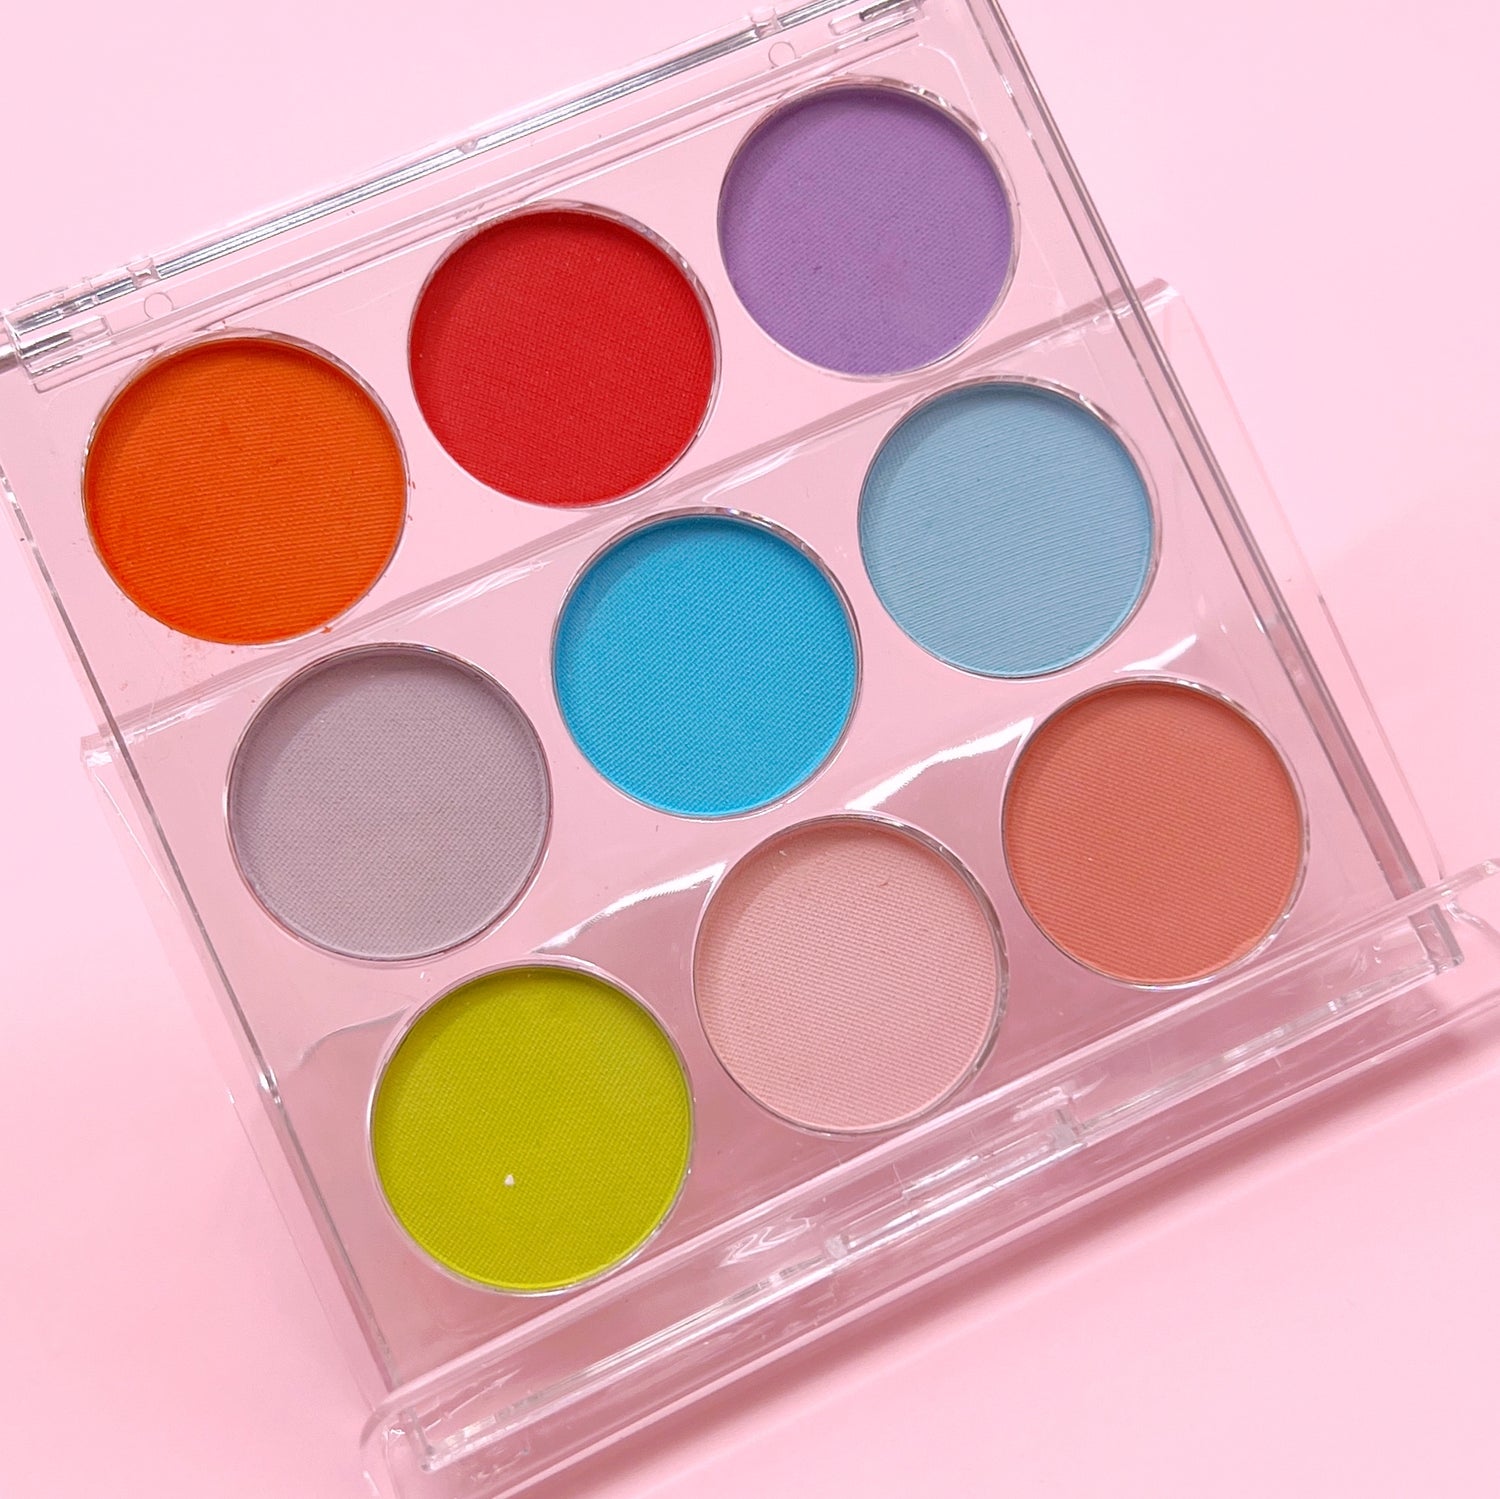 Mutlicolor pigment palette in clear case on pink background. 